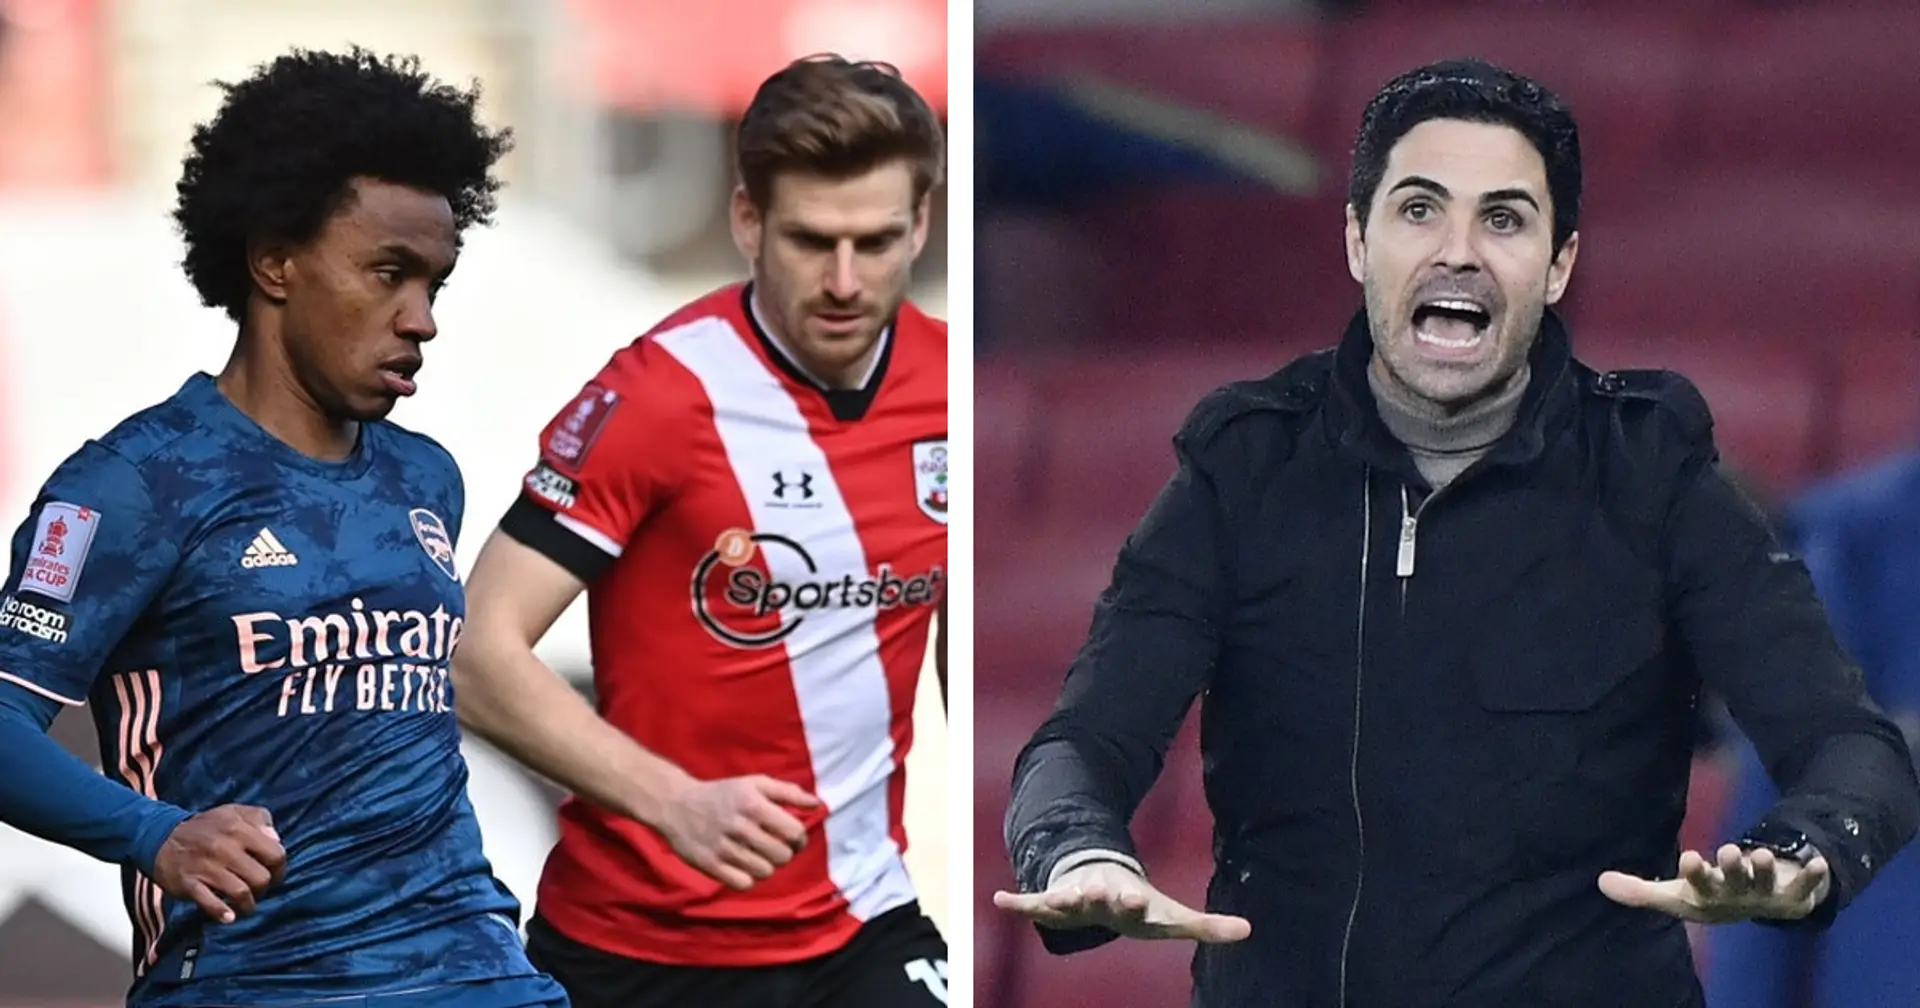 'He clearly does not give one single f*ck about the club. He is a leech': Fan baffled by Arteta's persistence with Willian after Soton loss